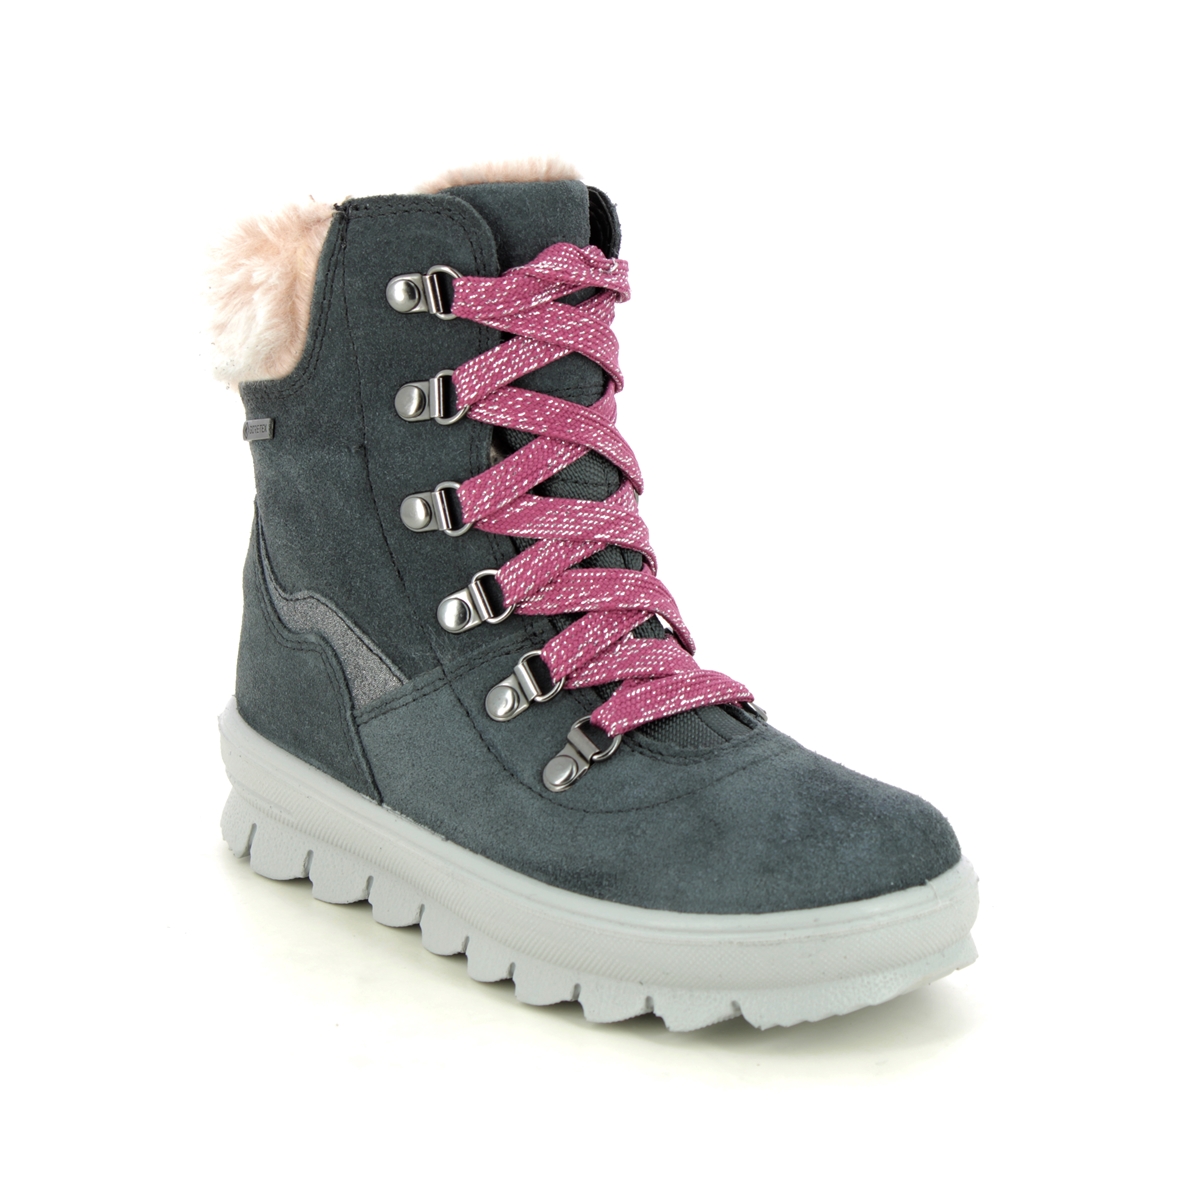 Superfit Flavia Lace Gtx Grey Suede Kids Girls Boots 1000220-2000 In Size 32 In Plain Grey Suede